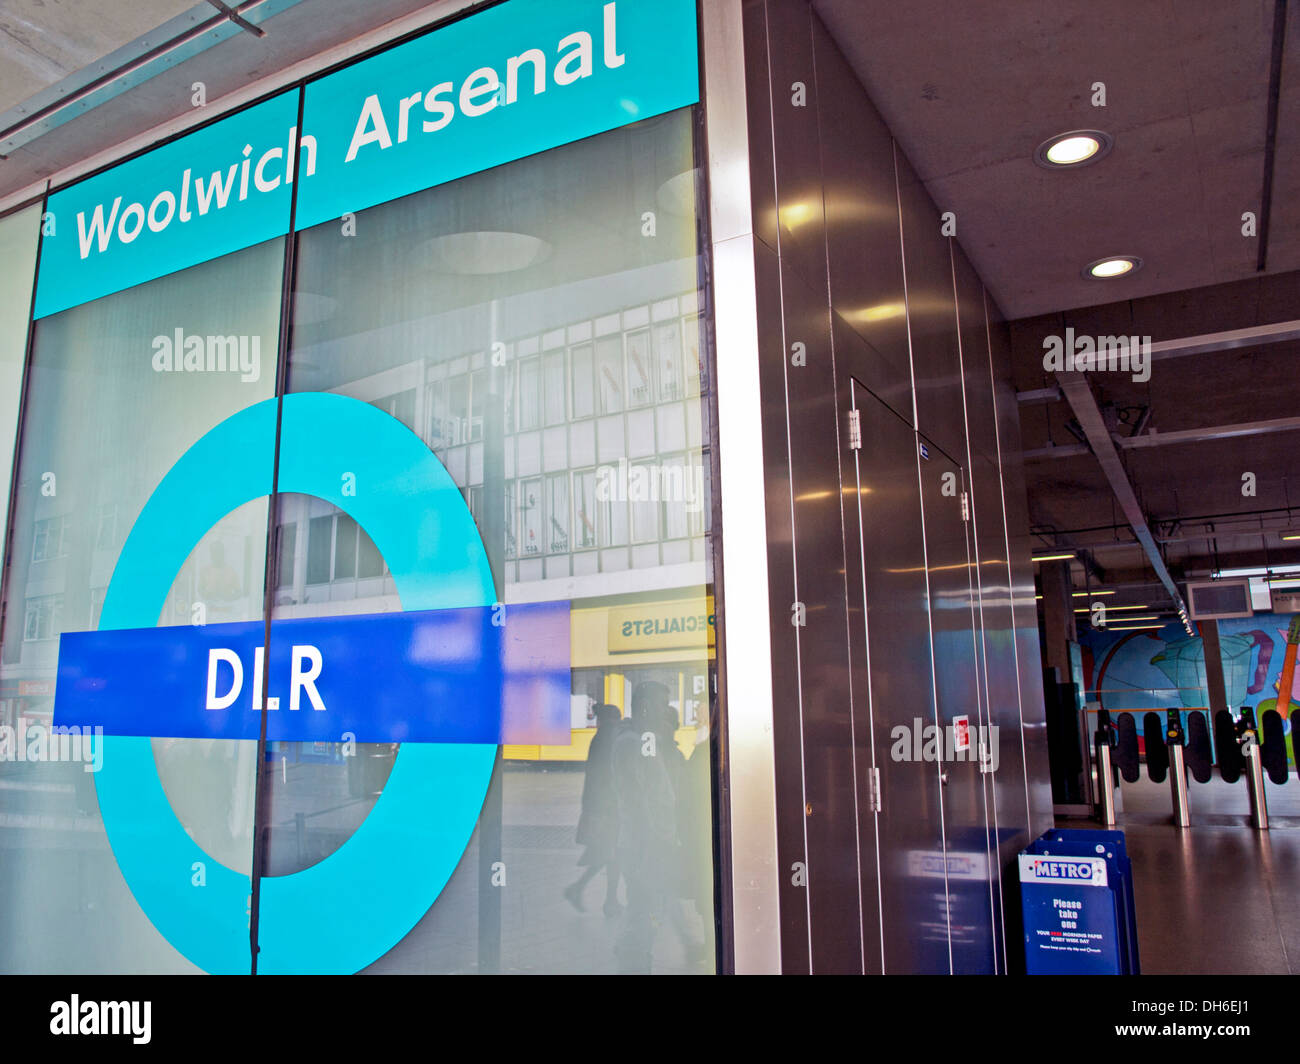 La station de DLR Woolwich Arsenal, Woolwich, Londres, Angleterre, Royaume-Uni Banque D'Images